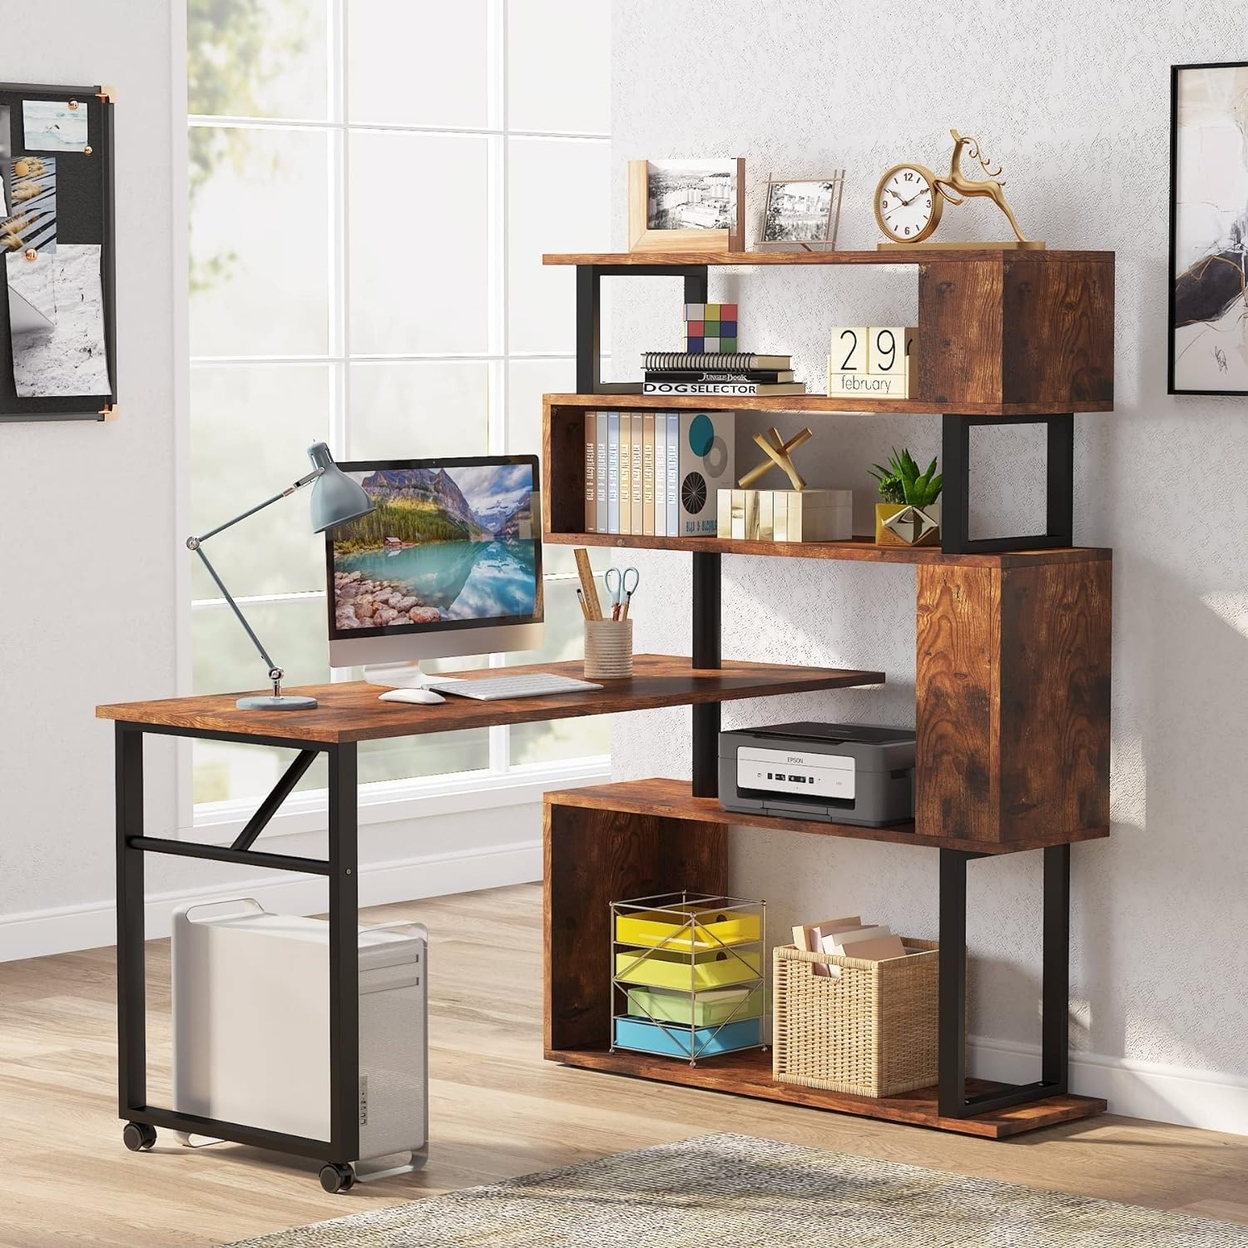 Tribesigns Rotating Computer Desk With 5 Shelves Bookshelf, Modern L-Shaped Corner Desk With Storage, Reversible Office Table With Wheels